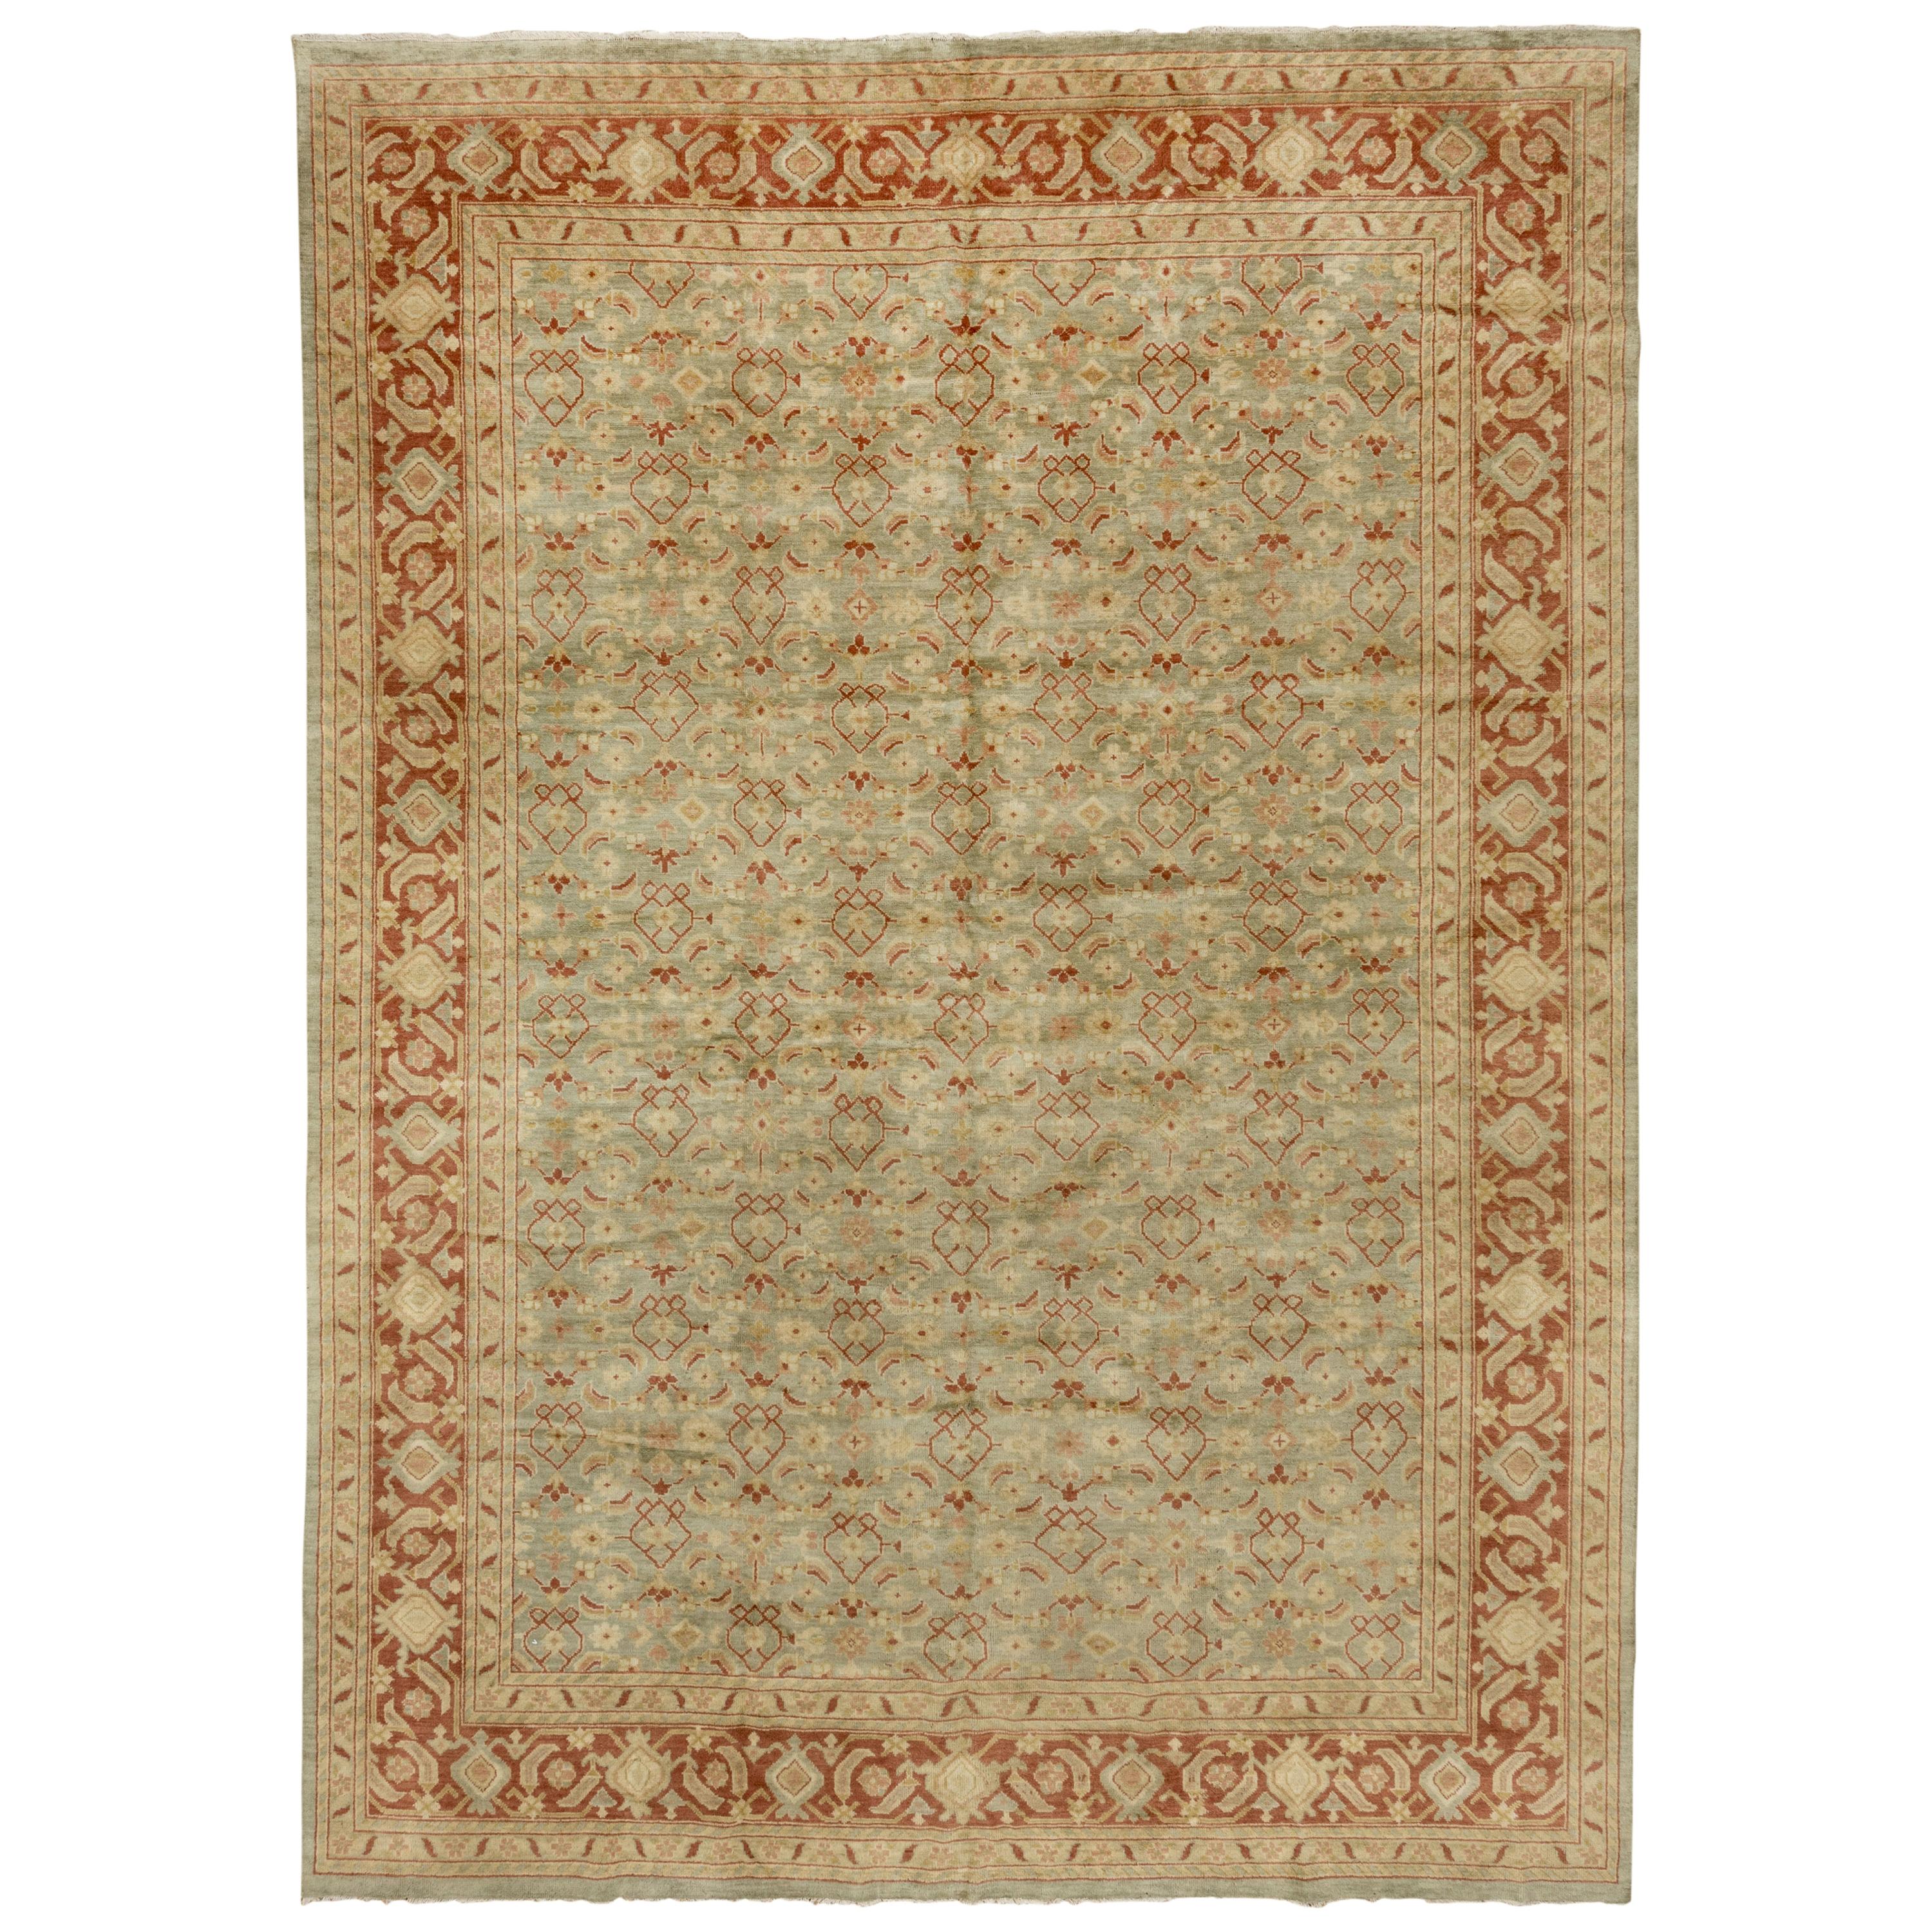 Hand Knotted Indian Mahal Design Carpet, Seafoam Colored Field, Red Borders